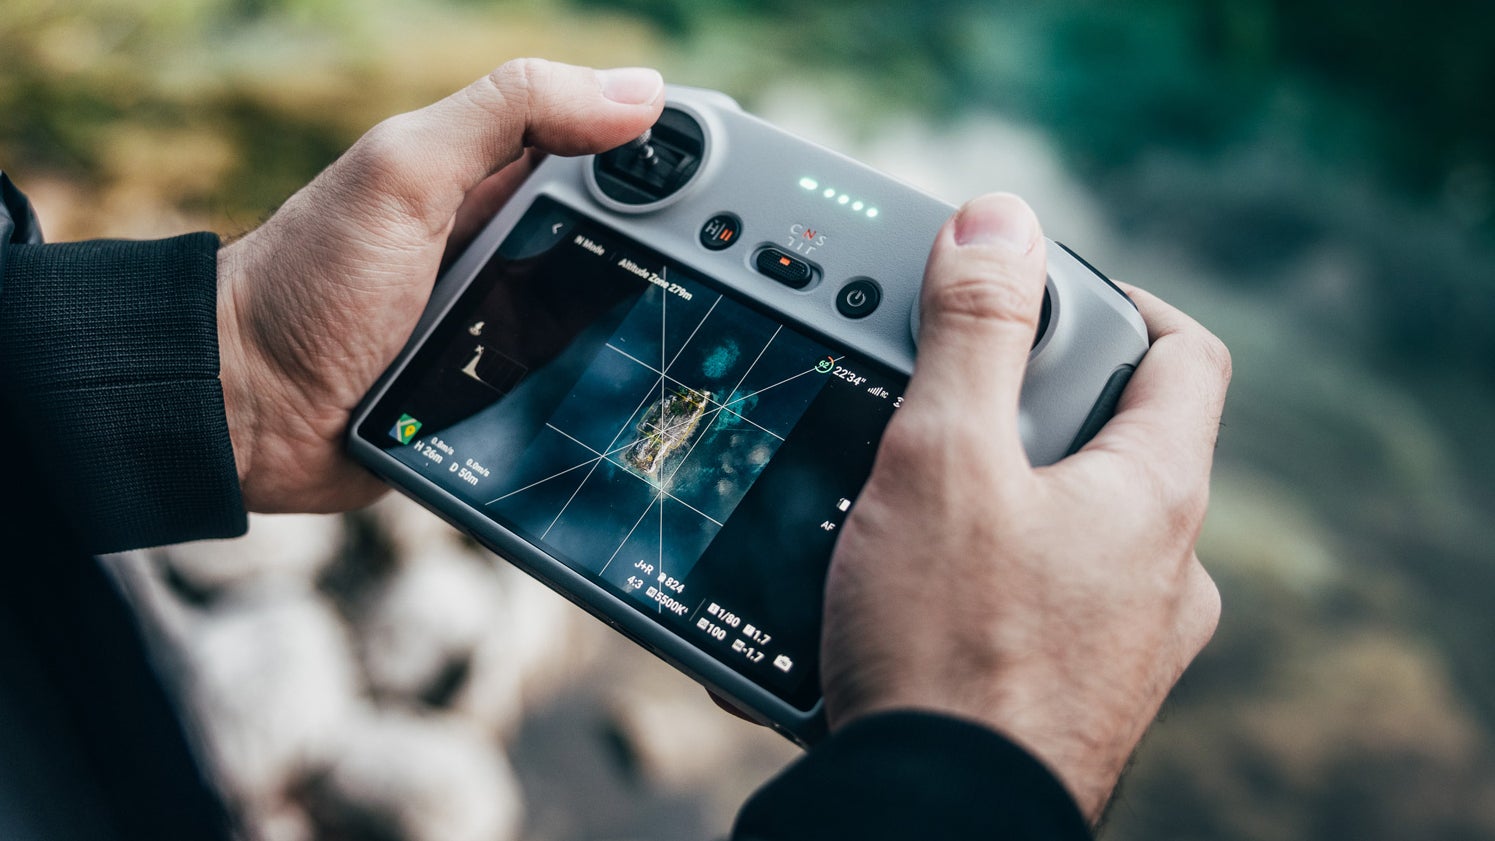 DJI is also introducing a new remote controller alongside the Mini 3 Pro, the DJI RC which features a 5.5-inch touchscreen built right in. (Image: DJI)